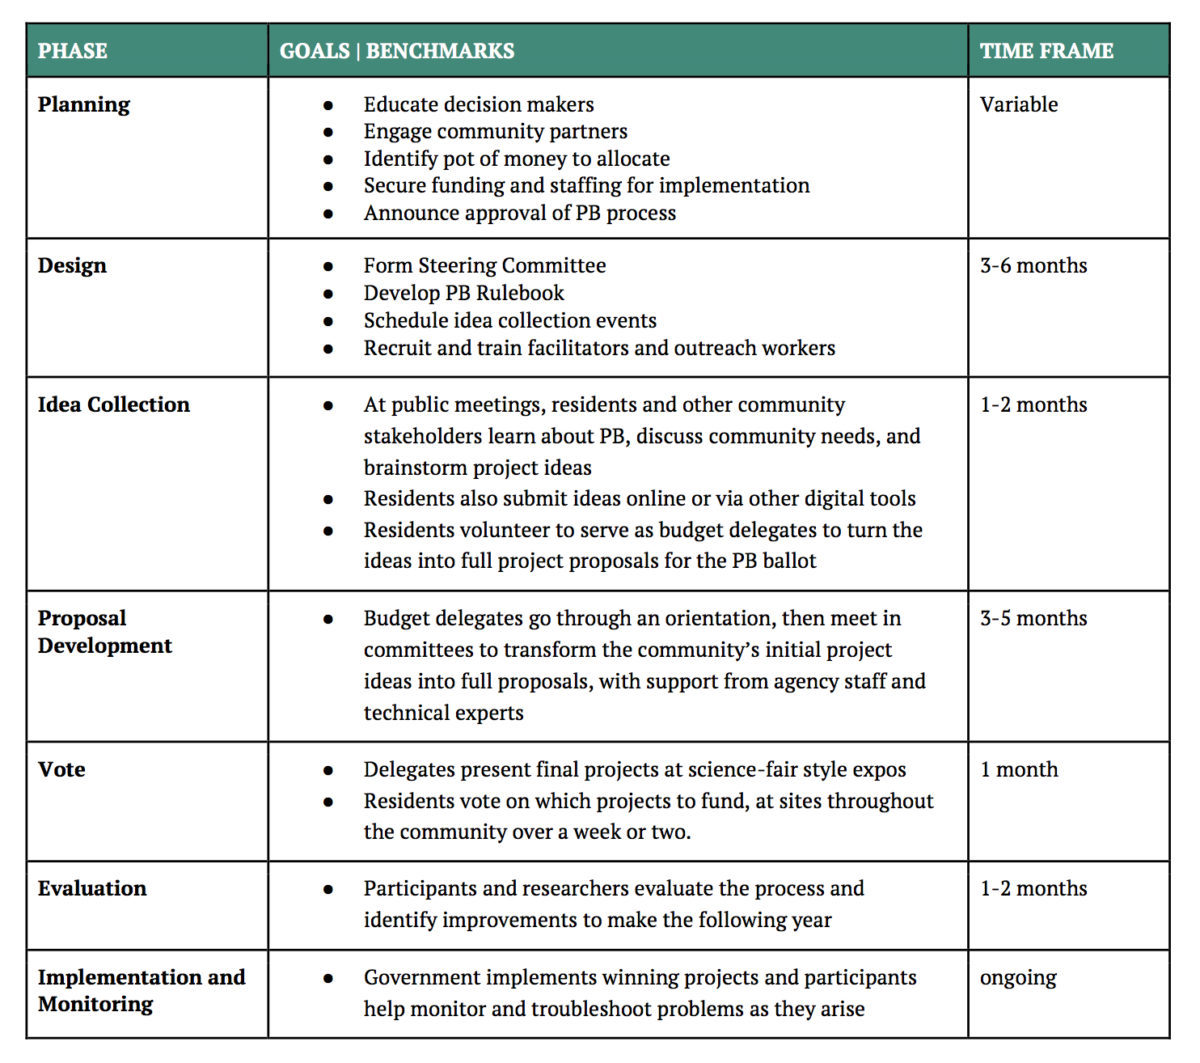 This table illustrates a typical participatory-budgeting timeline from planning through implementation and evaluation.